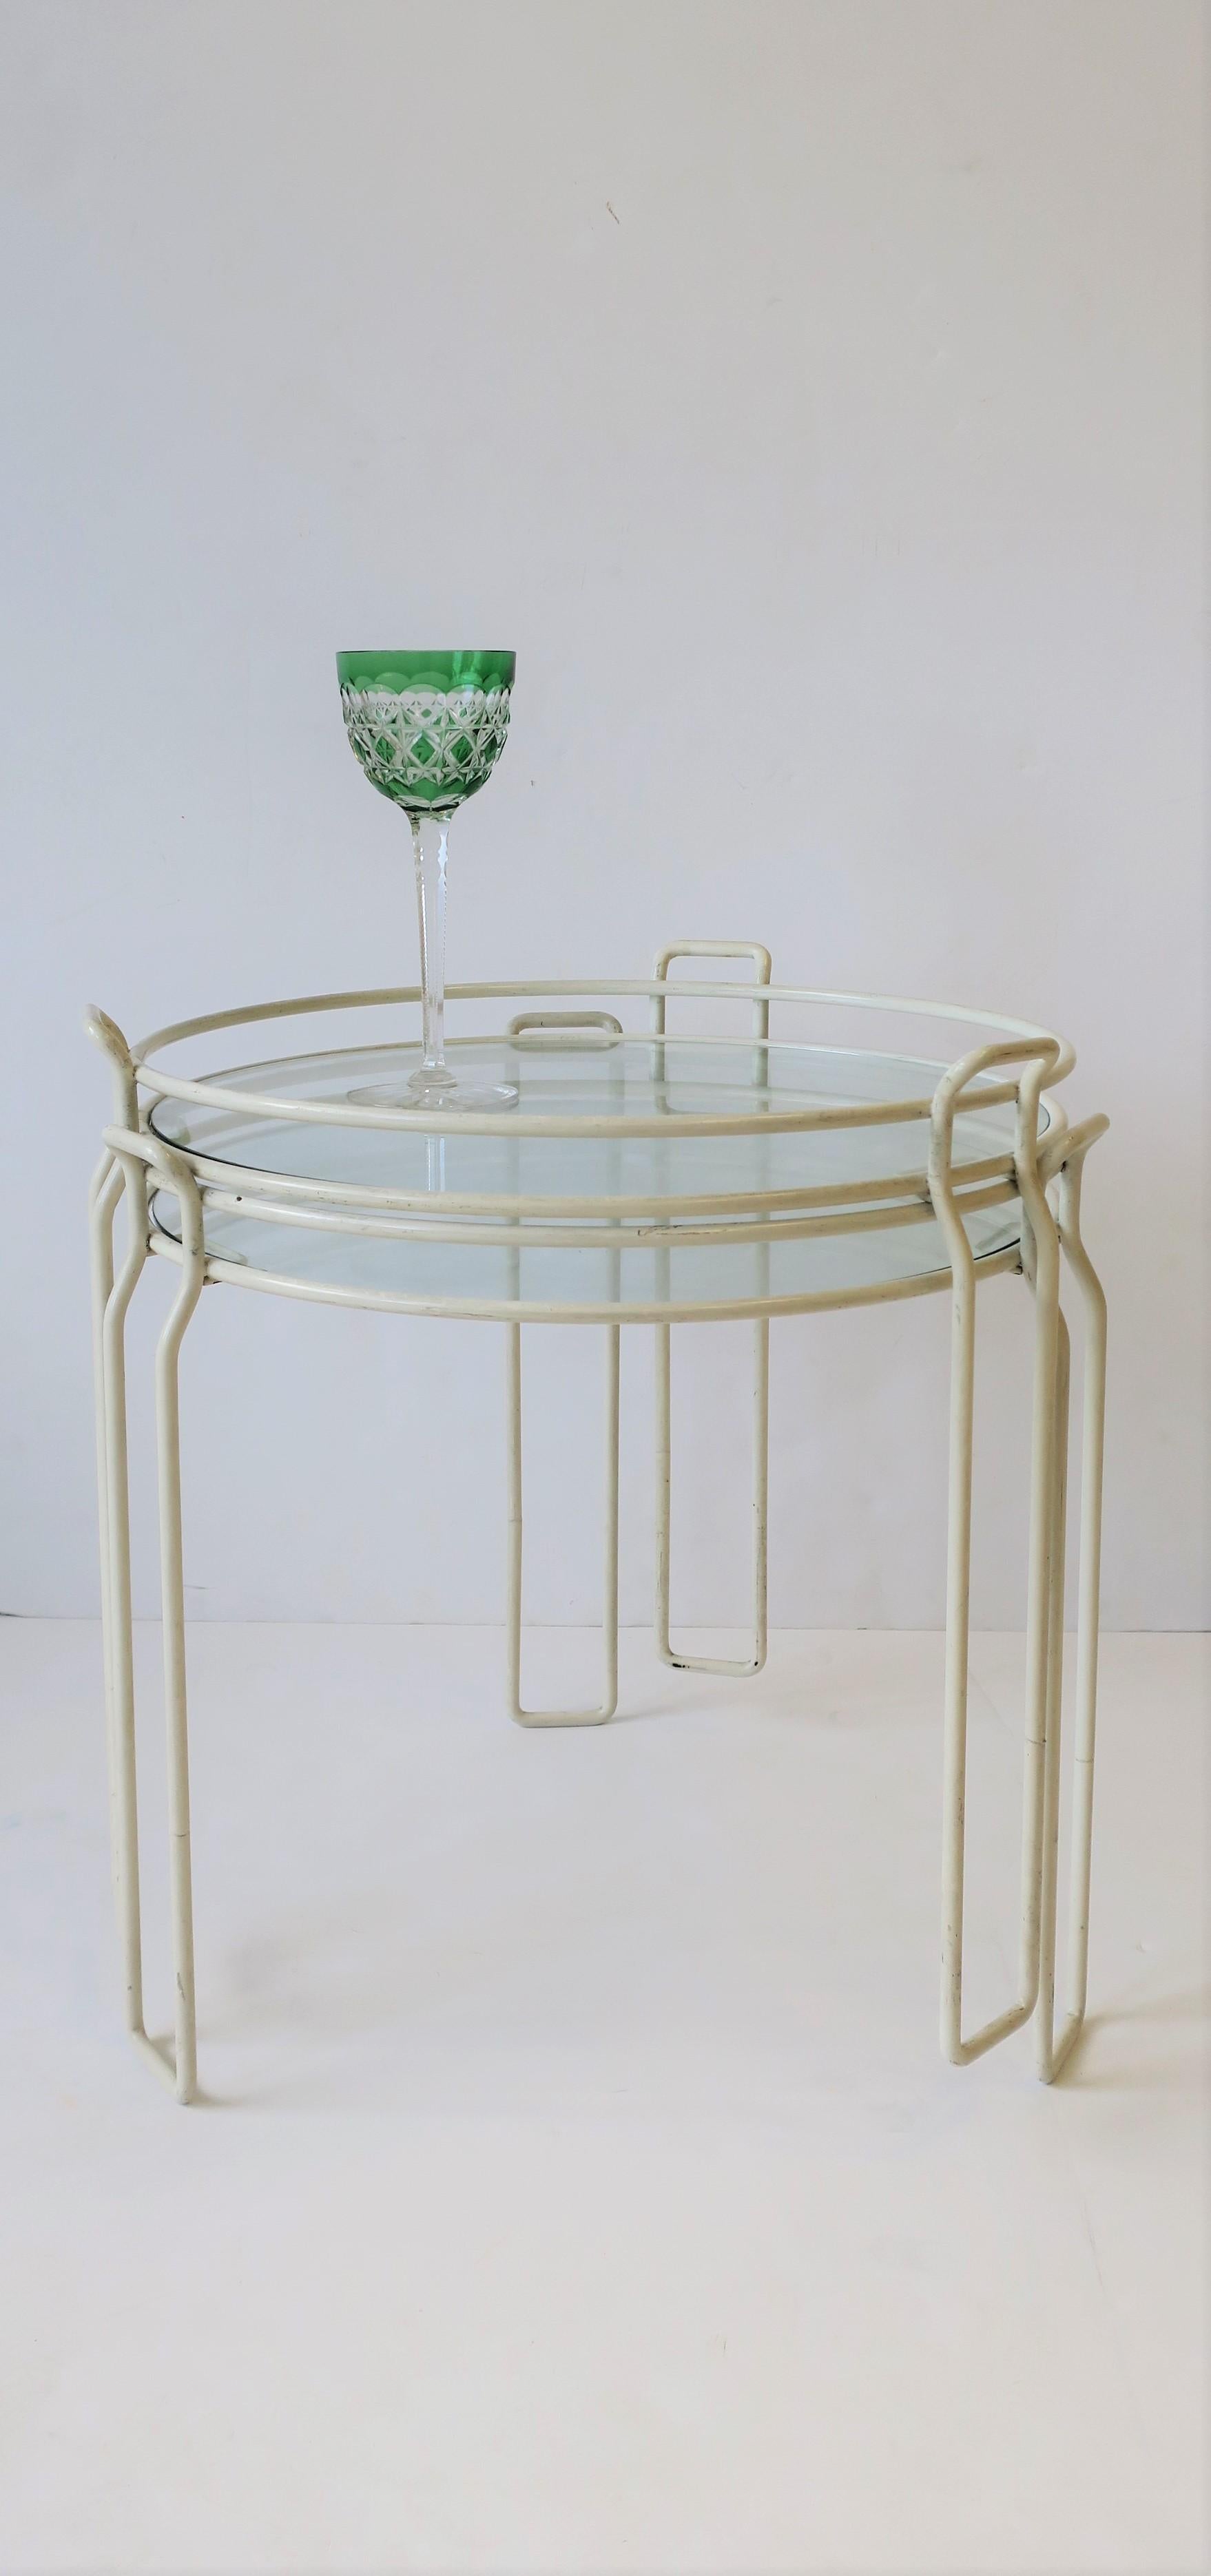 Glass Midcentury Modern White Side Drinks Nesting or Stacking Tables, Pair, 1960s For Sale